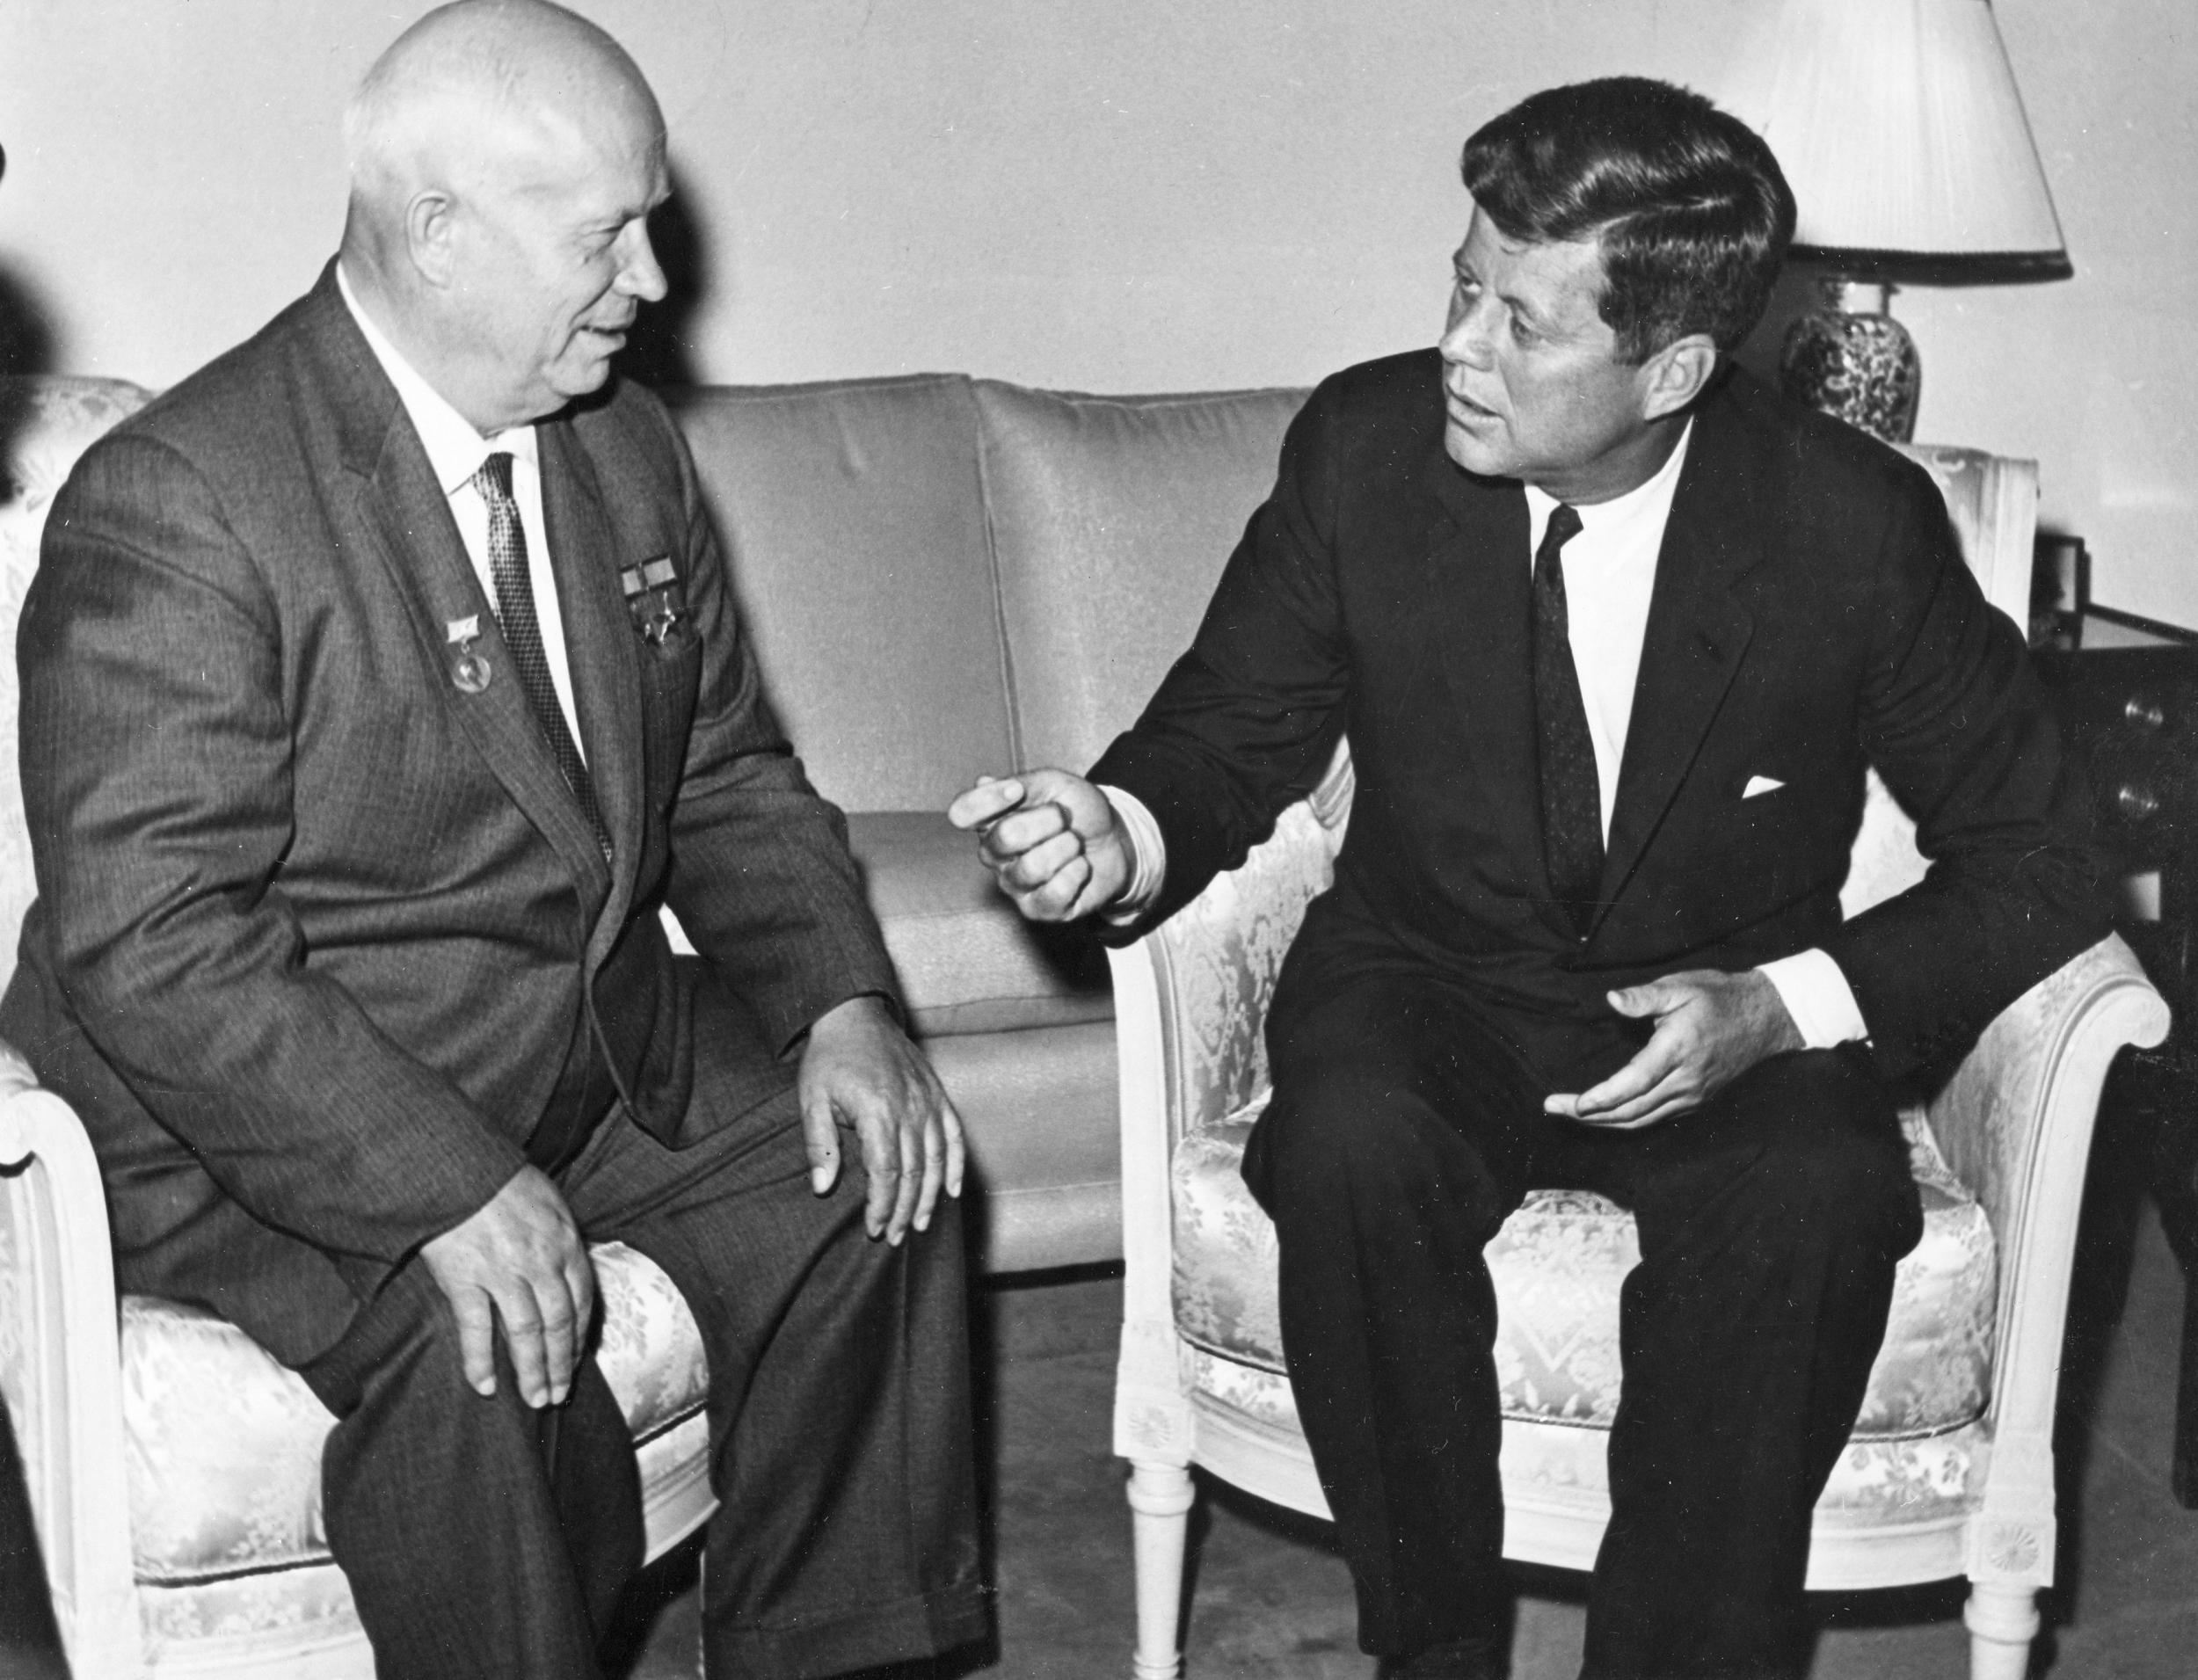 Nikita Khrushchev with with John F Kennedy in Vienna, Austria, in June 1961